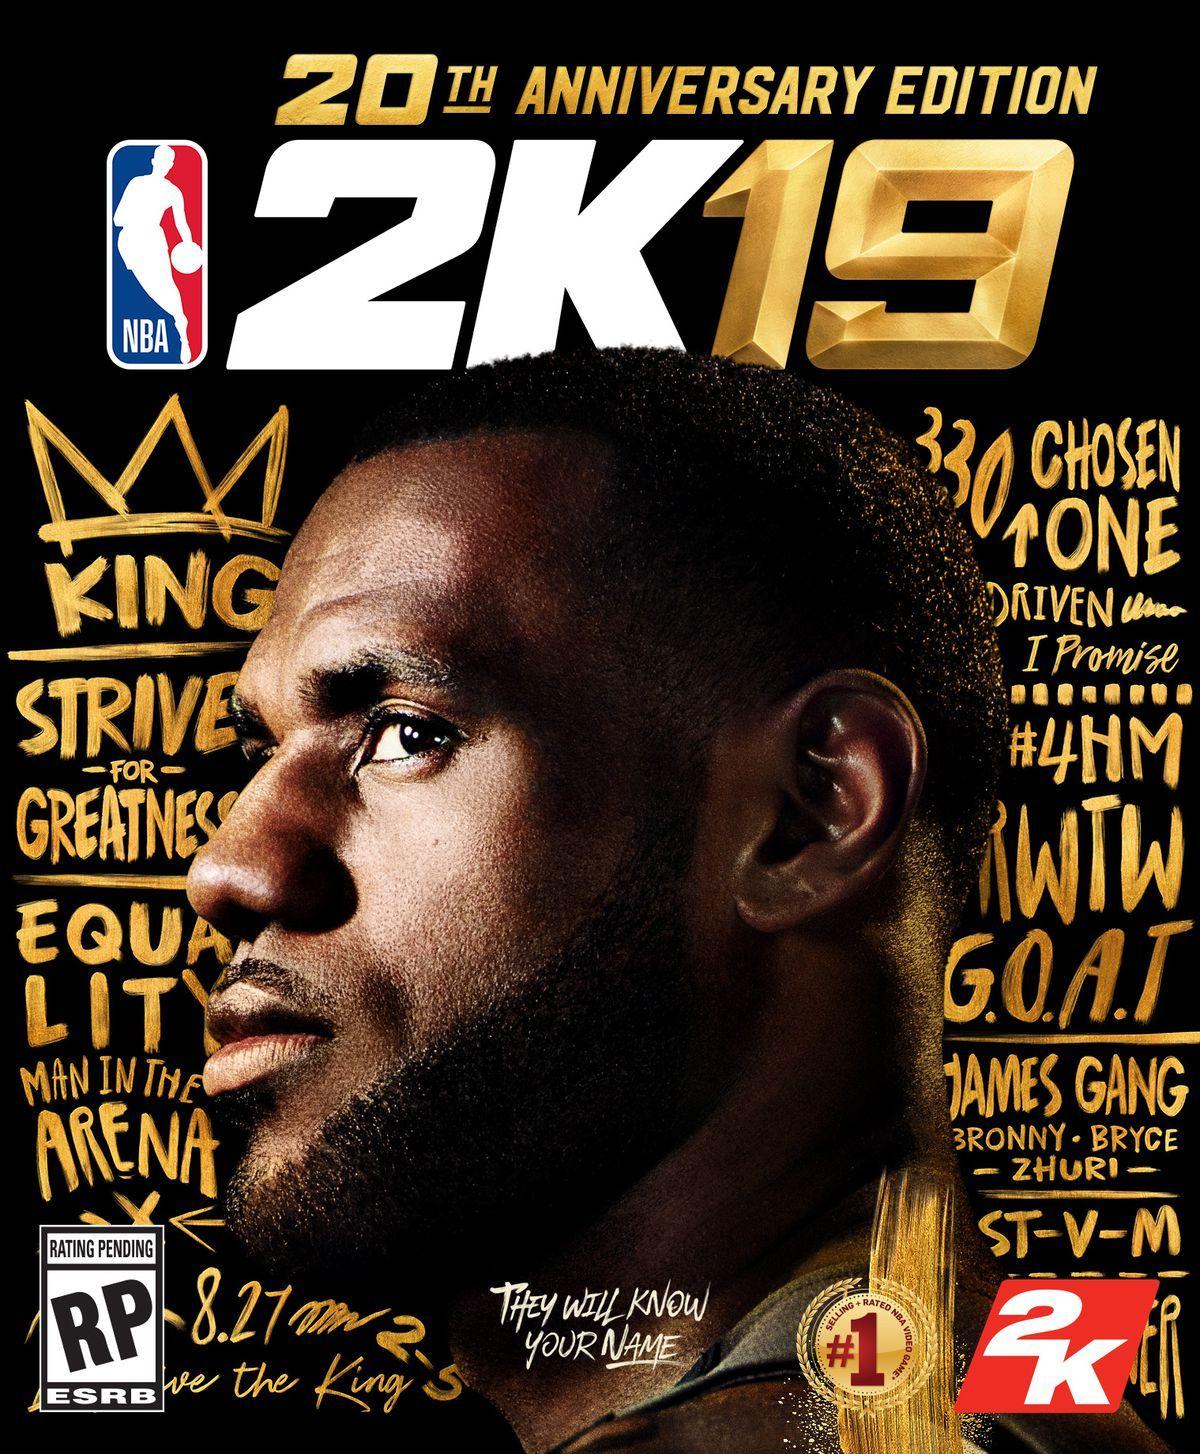 NBA 2K19's cover star, launch date, special edition details and more